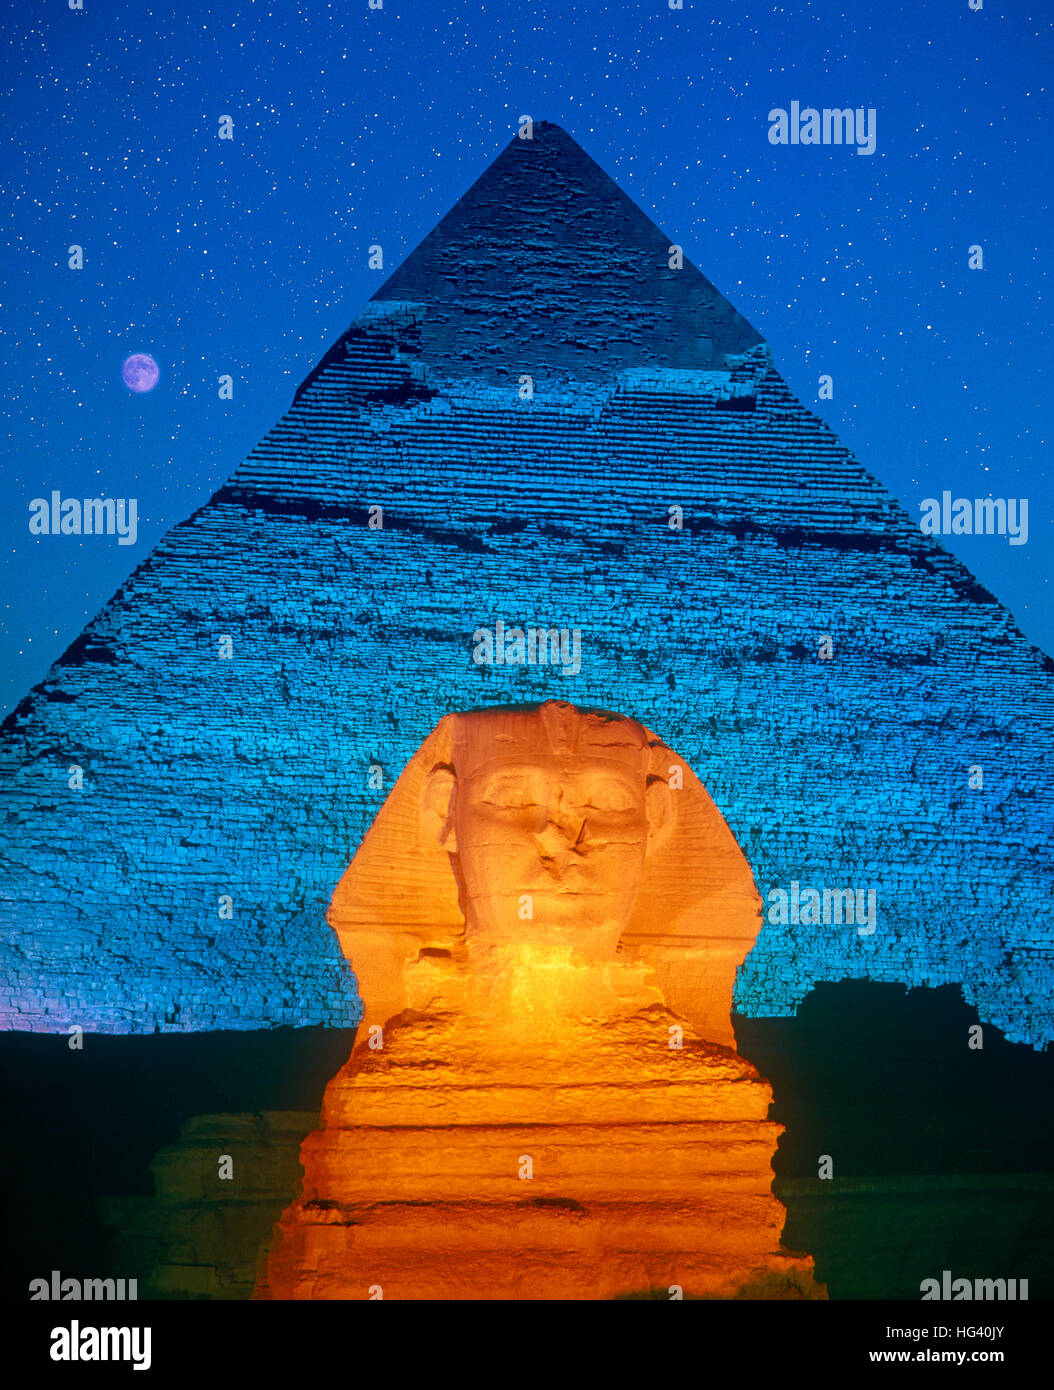 The moon in a starry sky during the Son et Lumiere at the Sphinx and Pyramid, Giza, Cairo, Egypt. Stock Photo